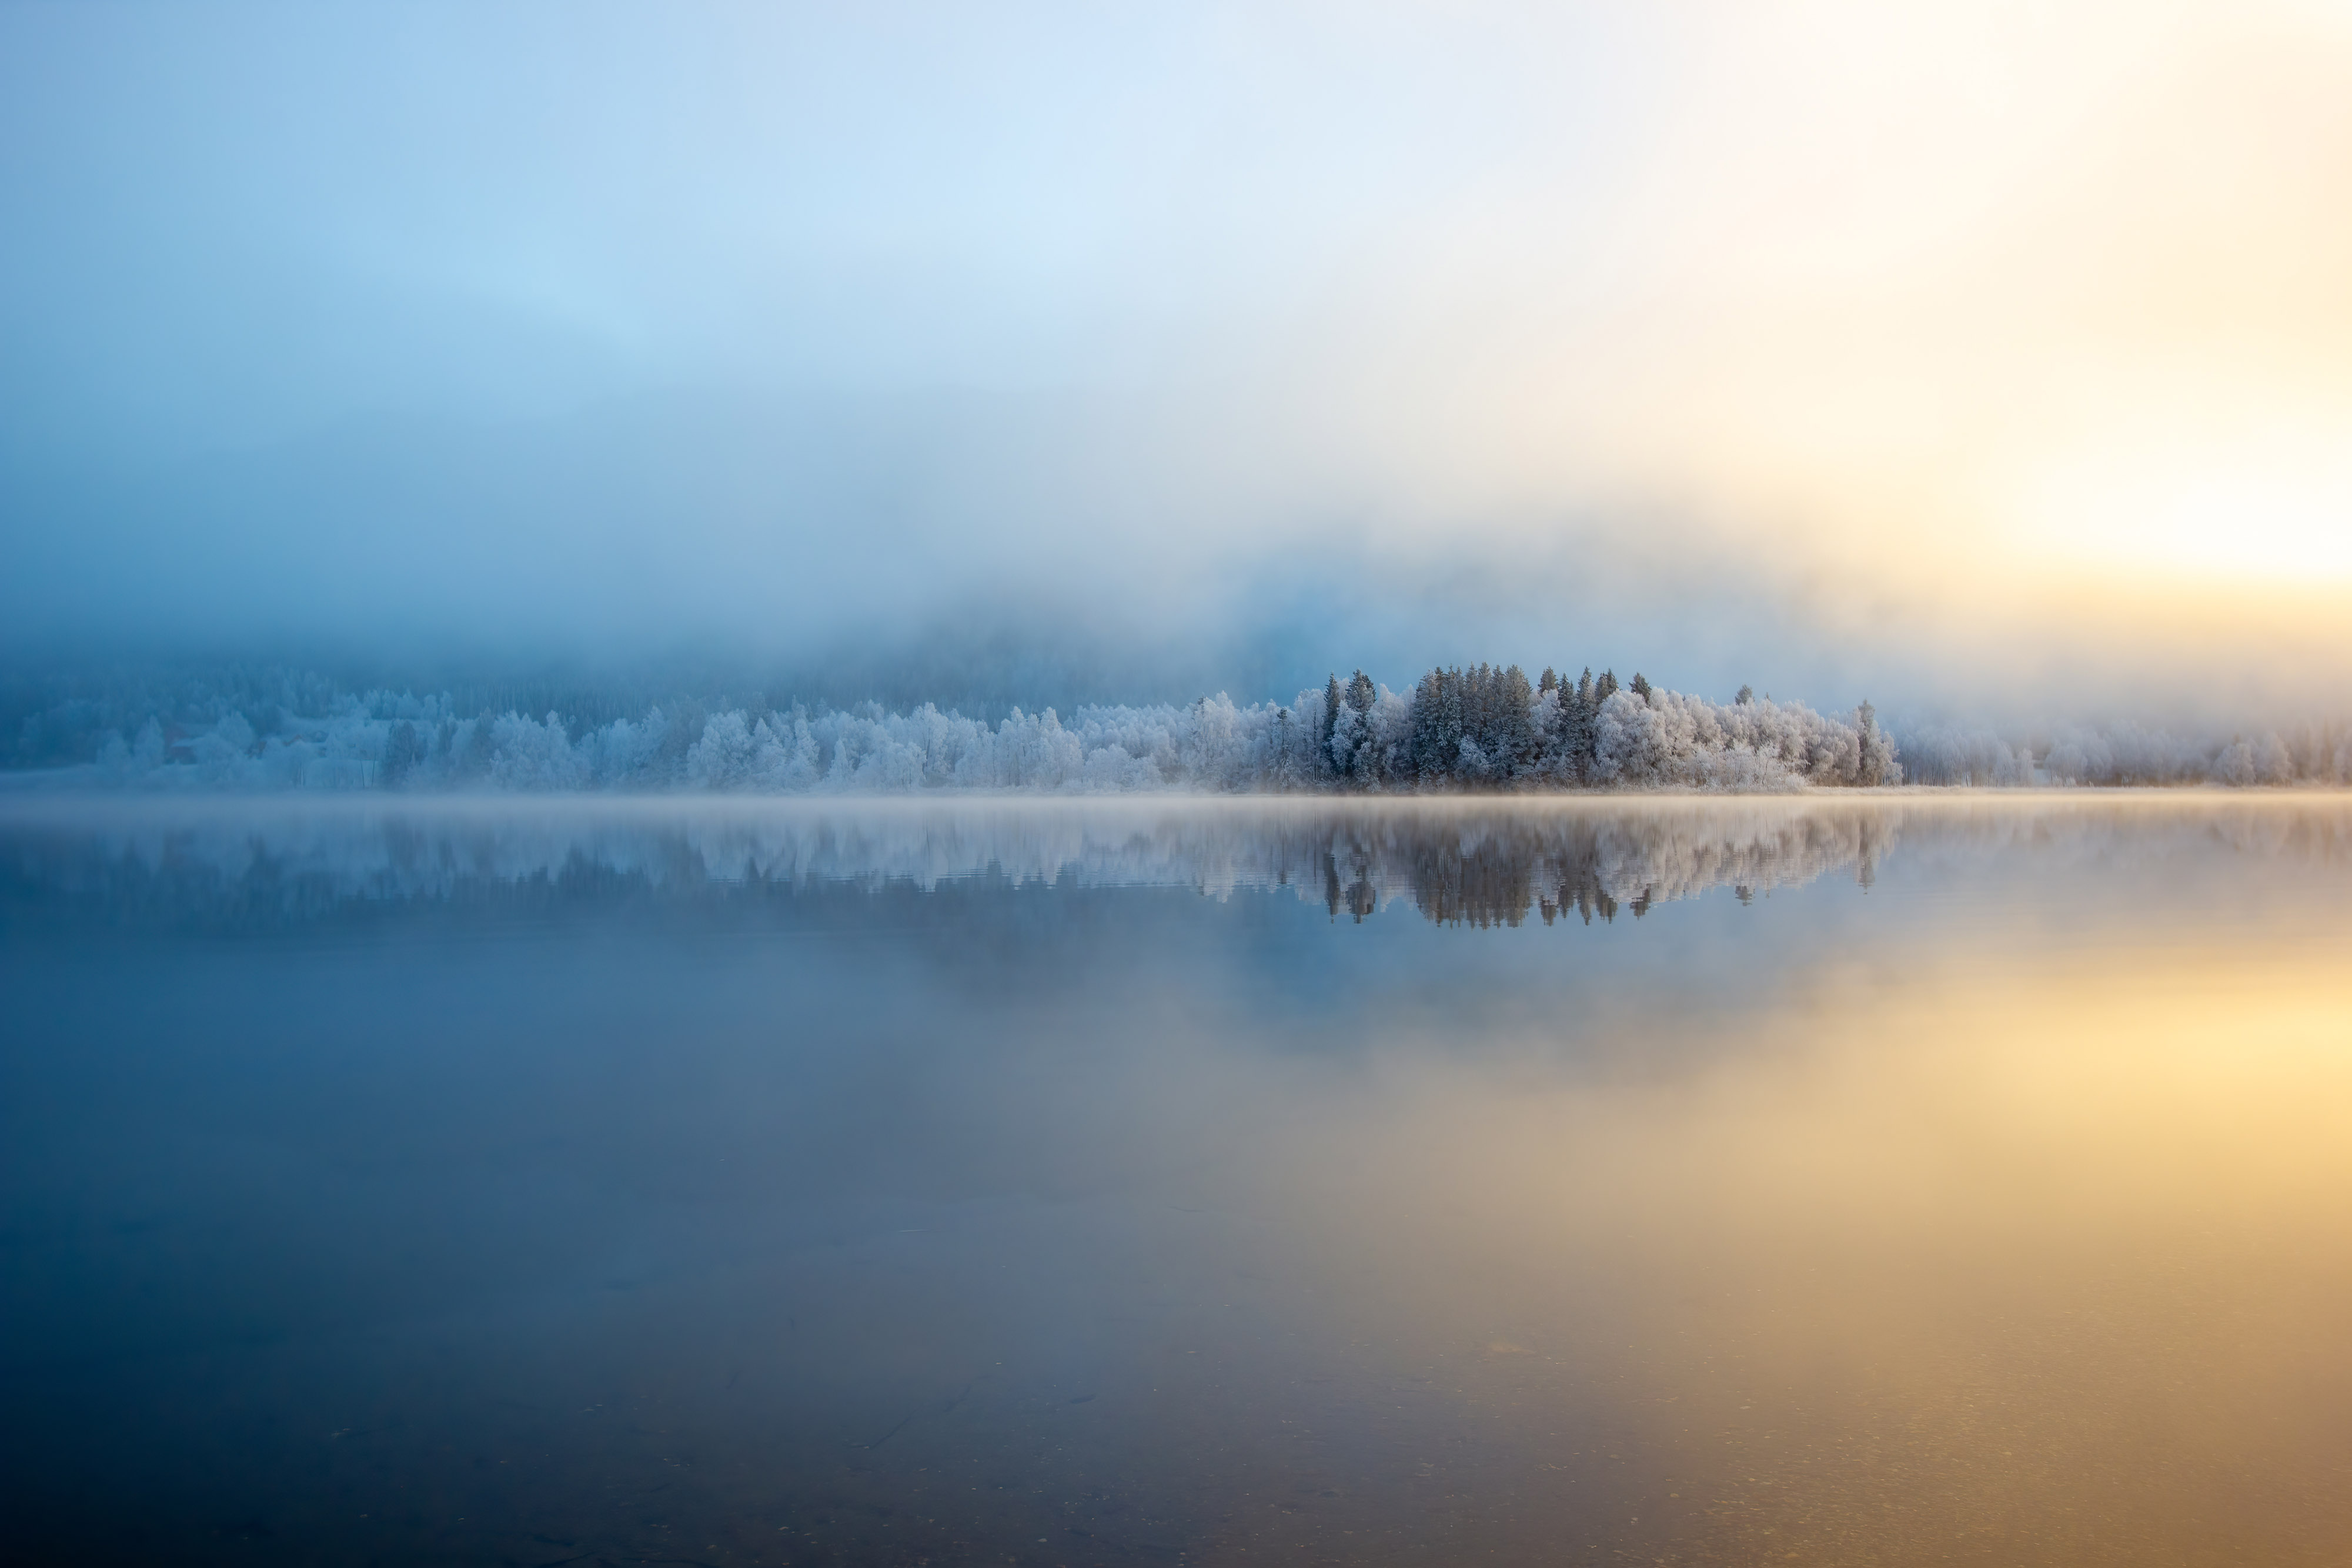 'Reflection'. The mist slowly thinned giving a glimpse of the trees on the other side, I grabbed my tripod to set up this shot. © Effy Varley/TNC Photo Contest